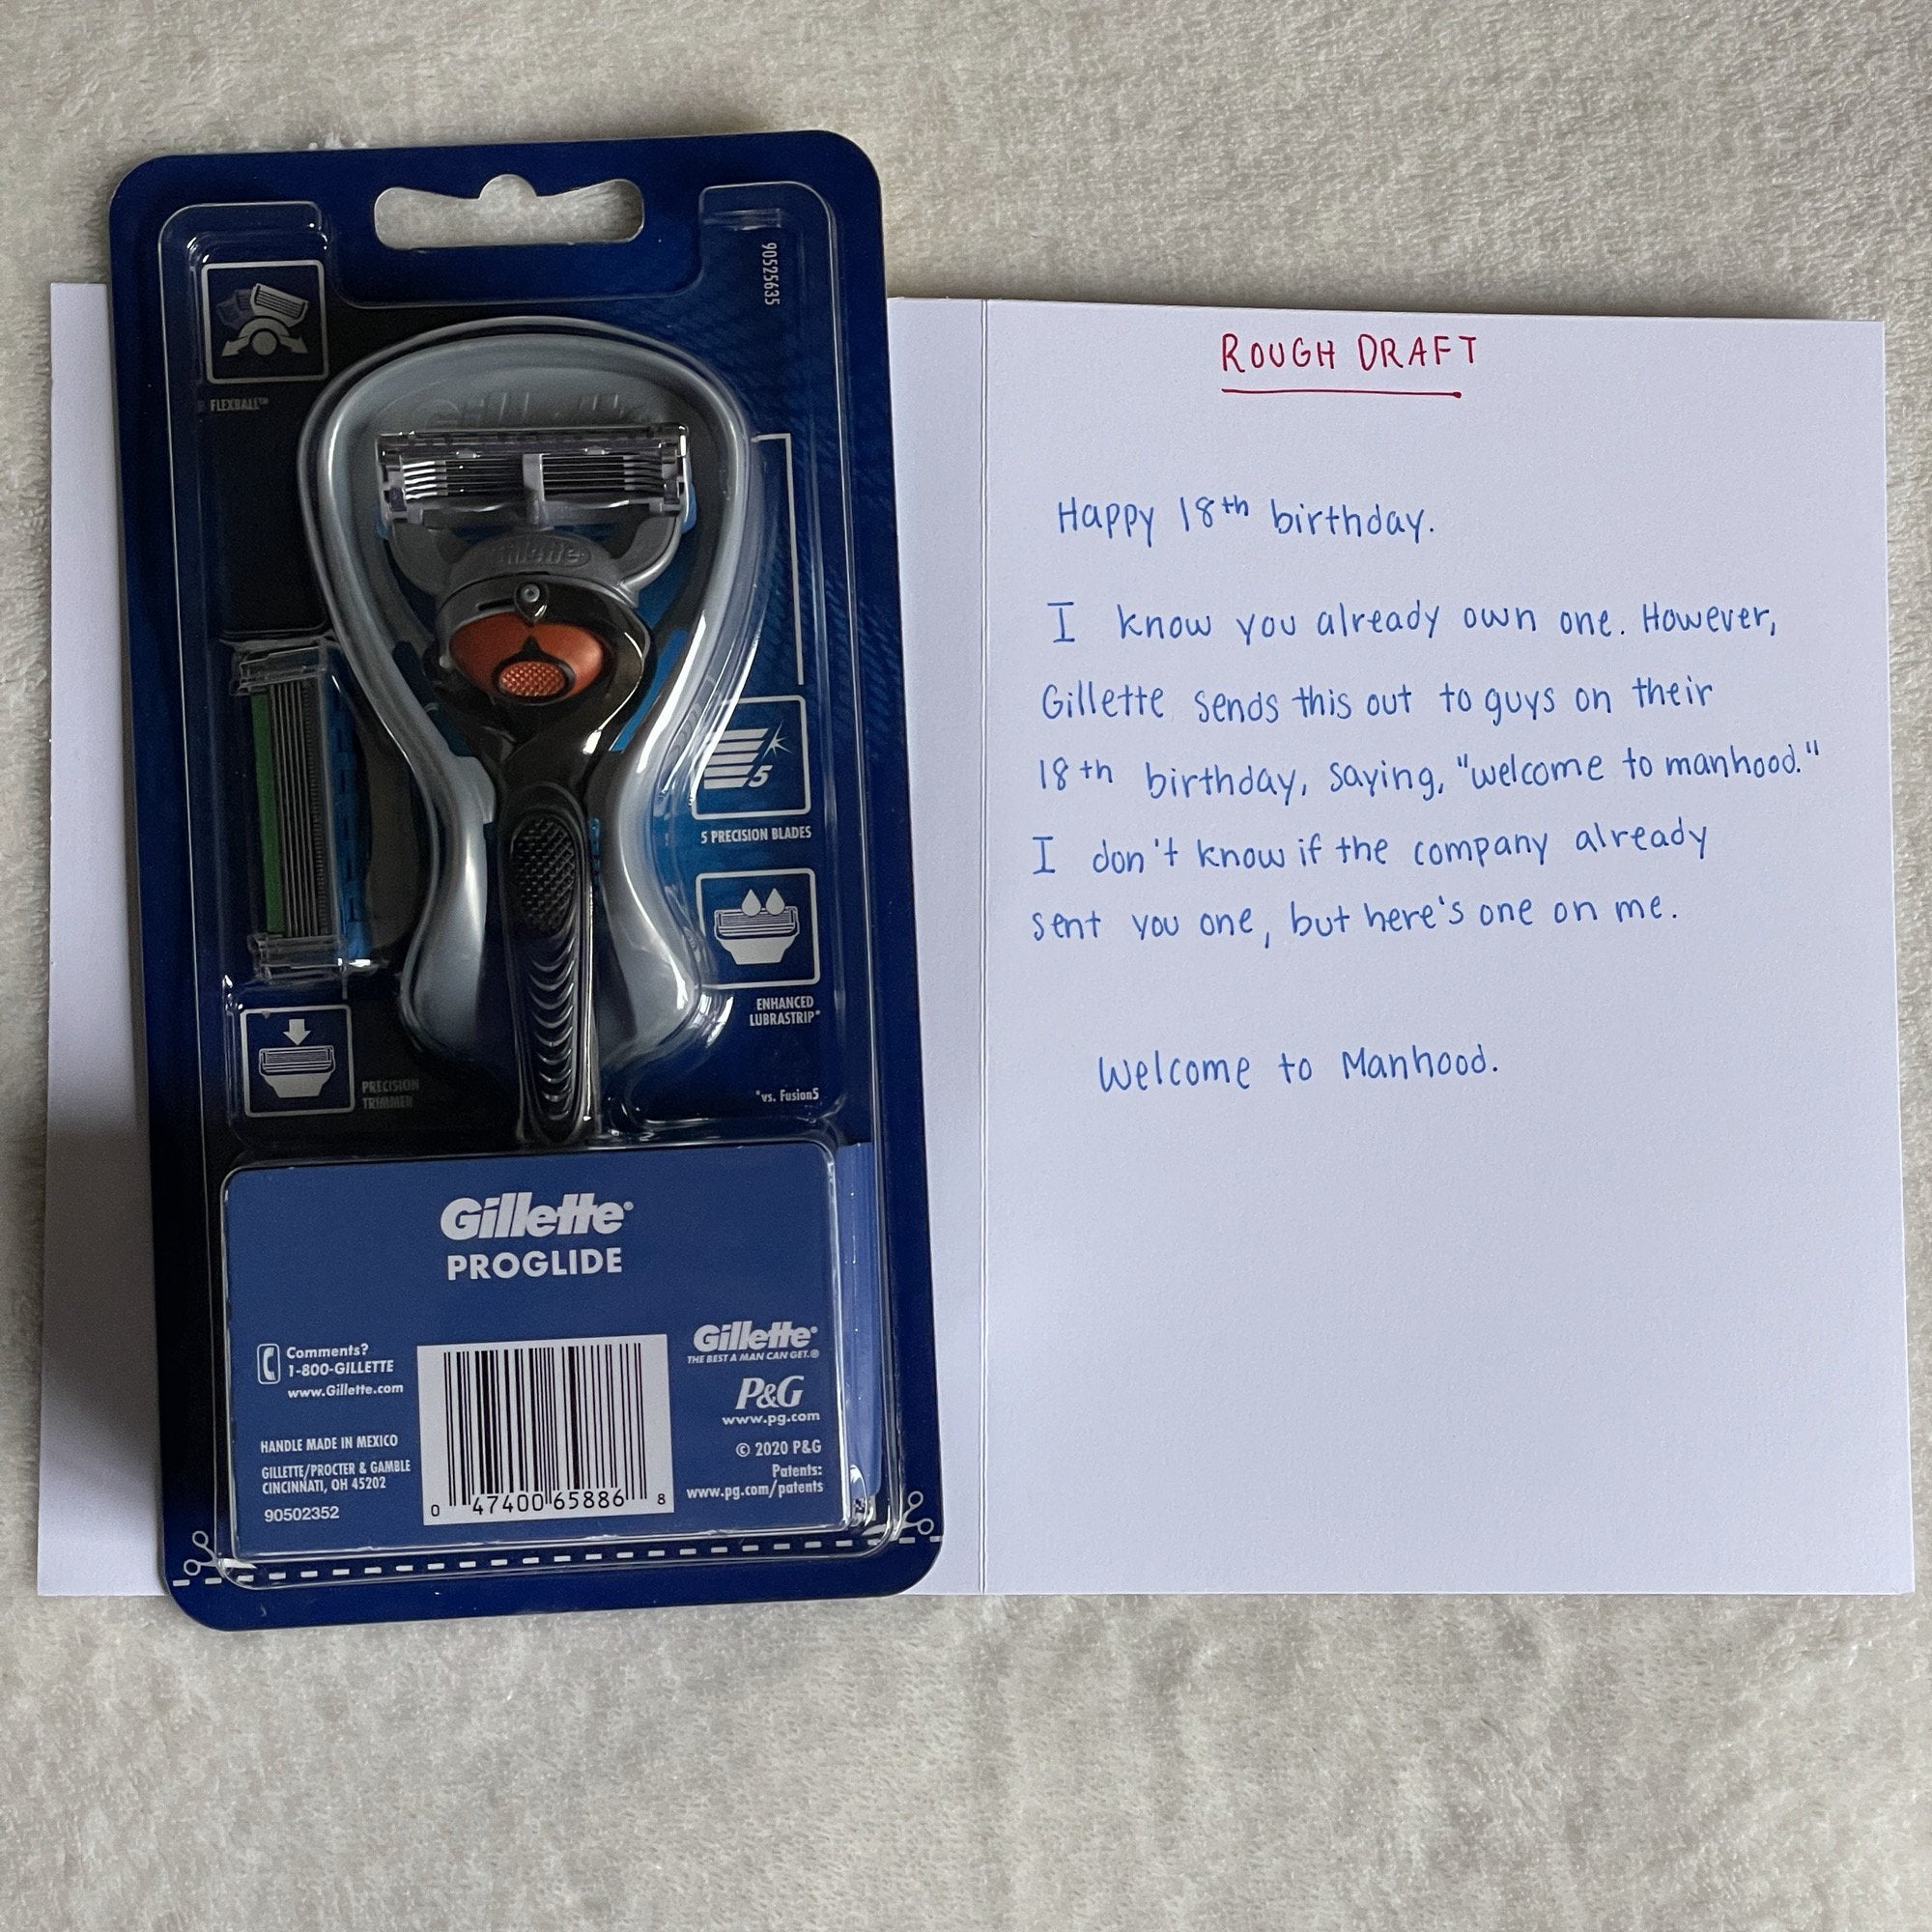 My friend is a gay trans man and hes turning 18. Gillette sends a ...